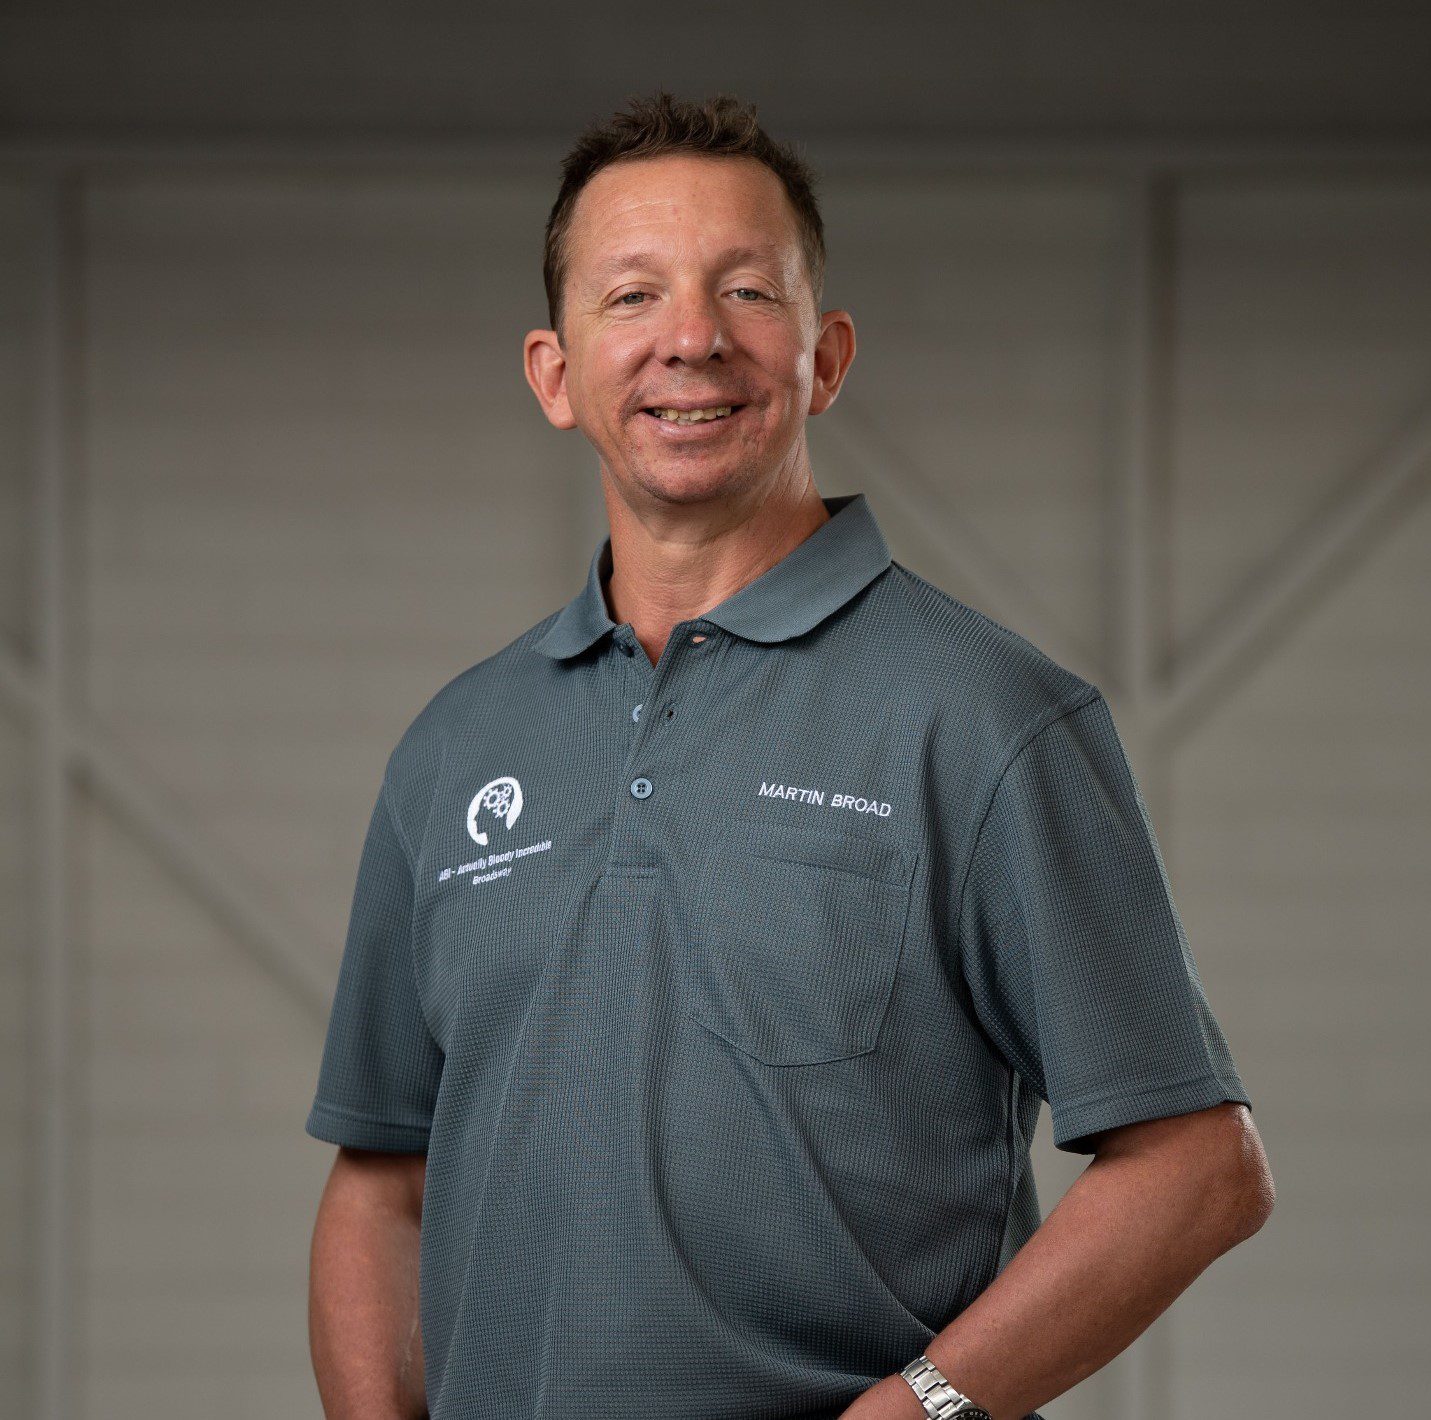 A man standing with his hands in his pant pockets, wearing a grey polo and smiling at the camera.